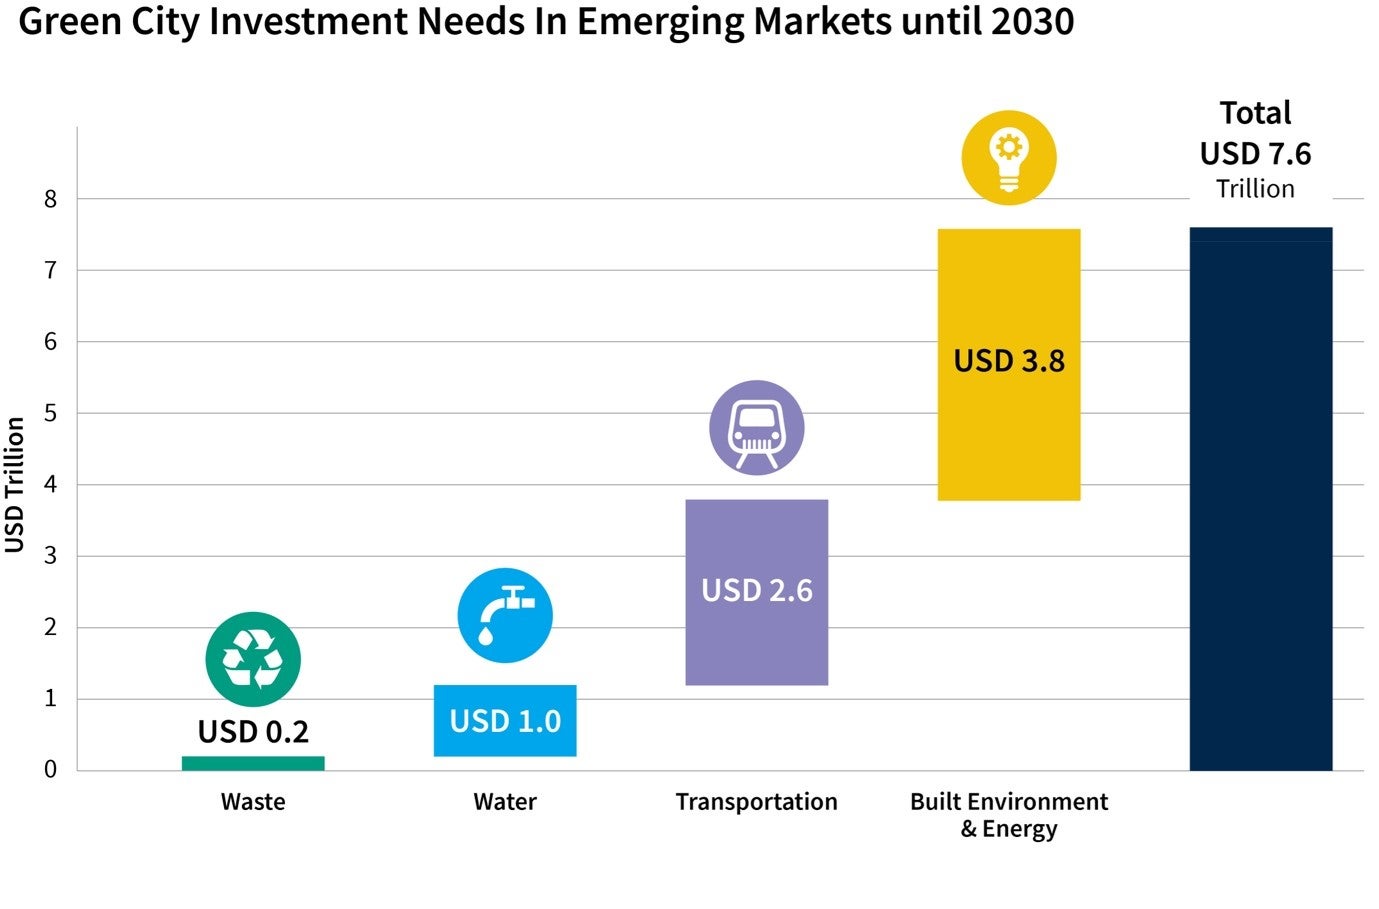 Green City investment needs in emerging markets until 2030